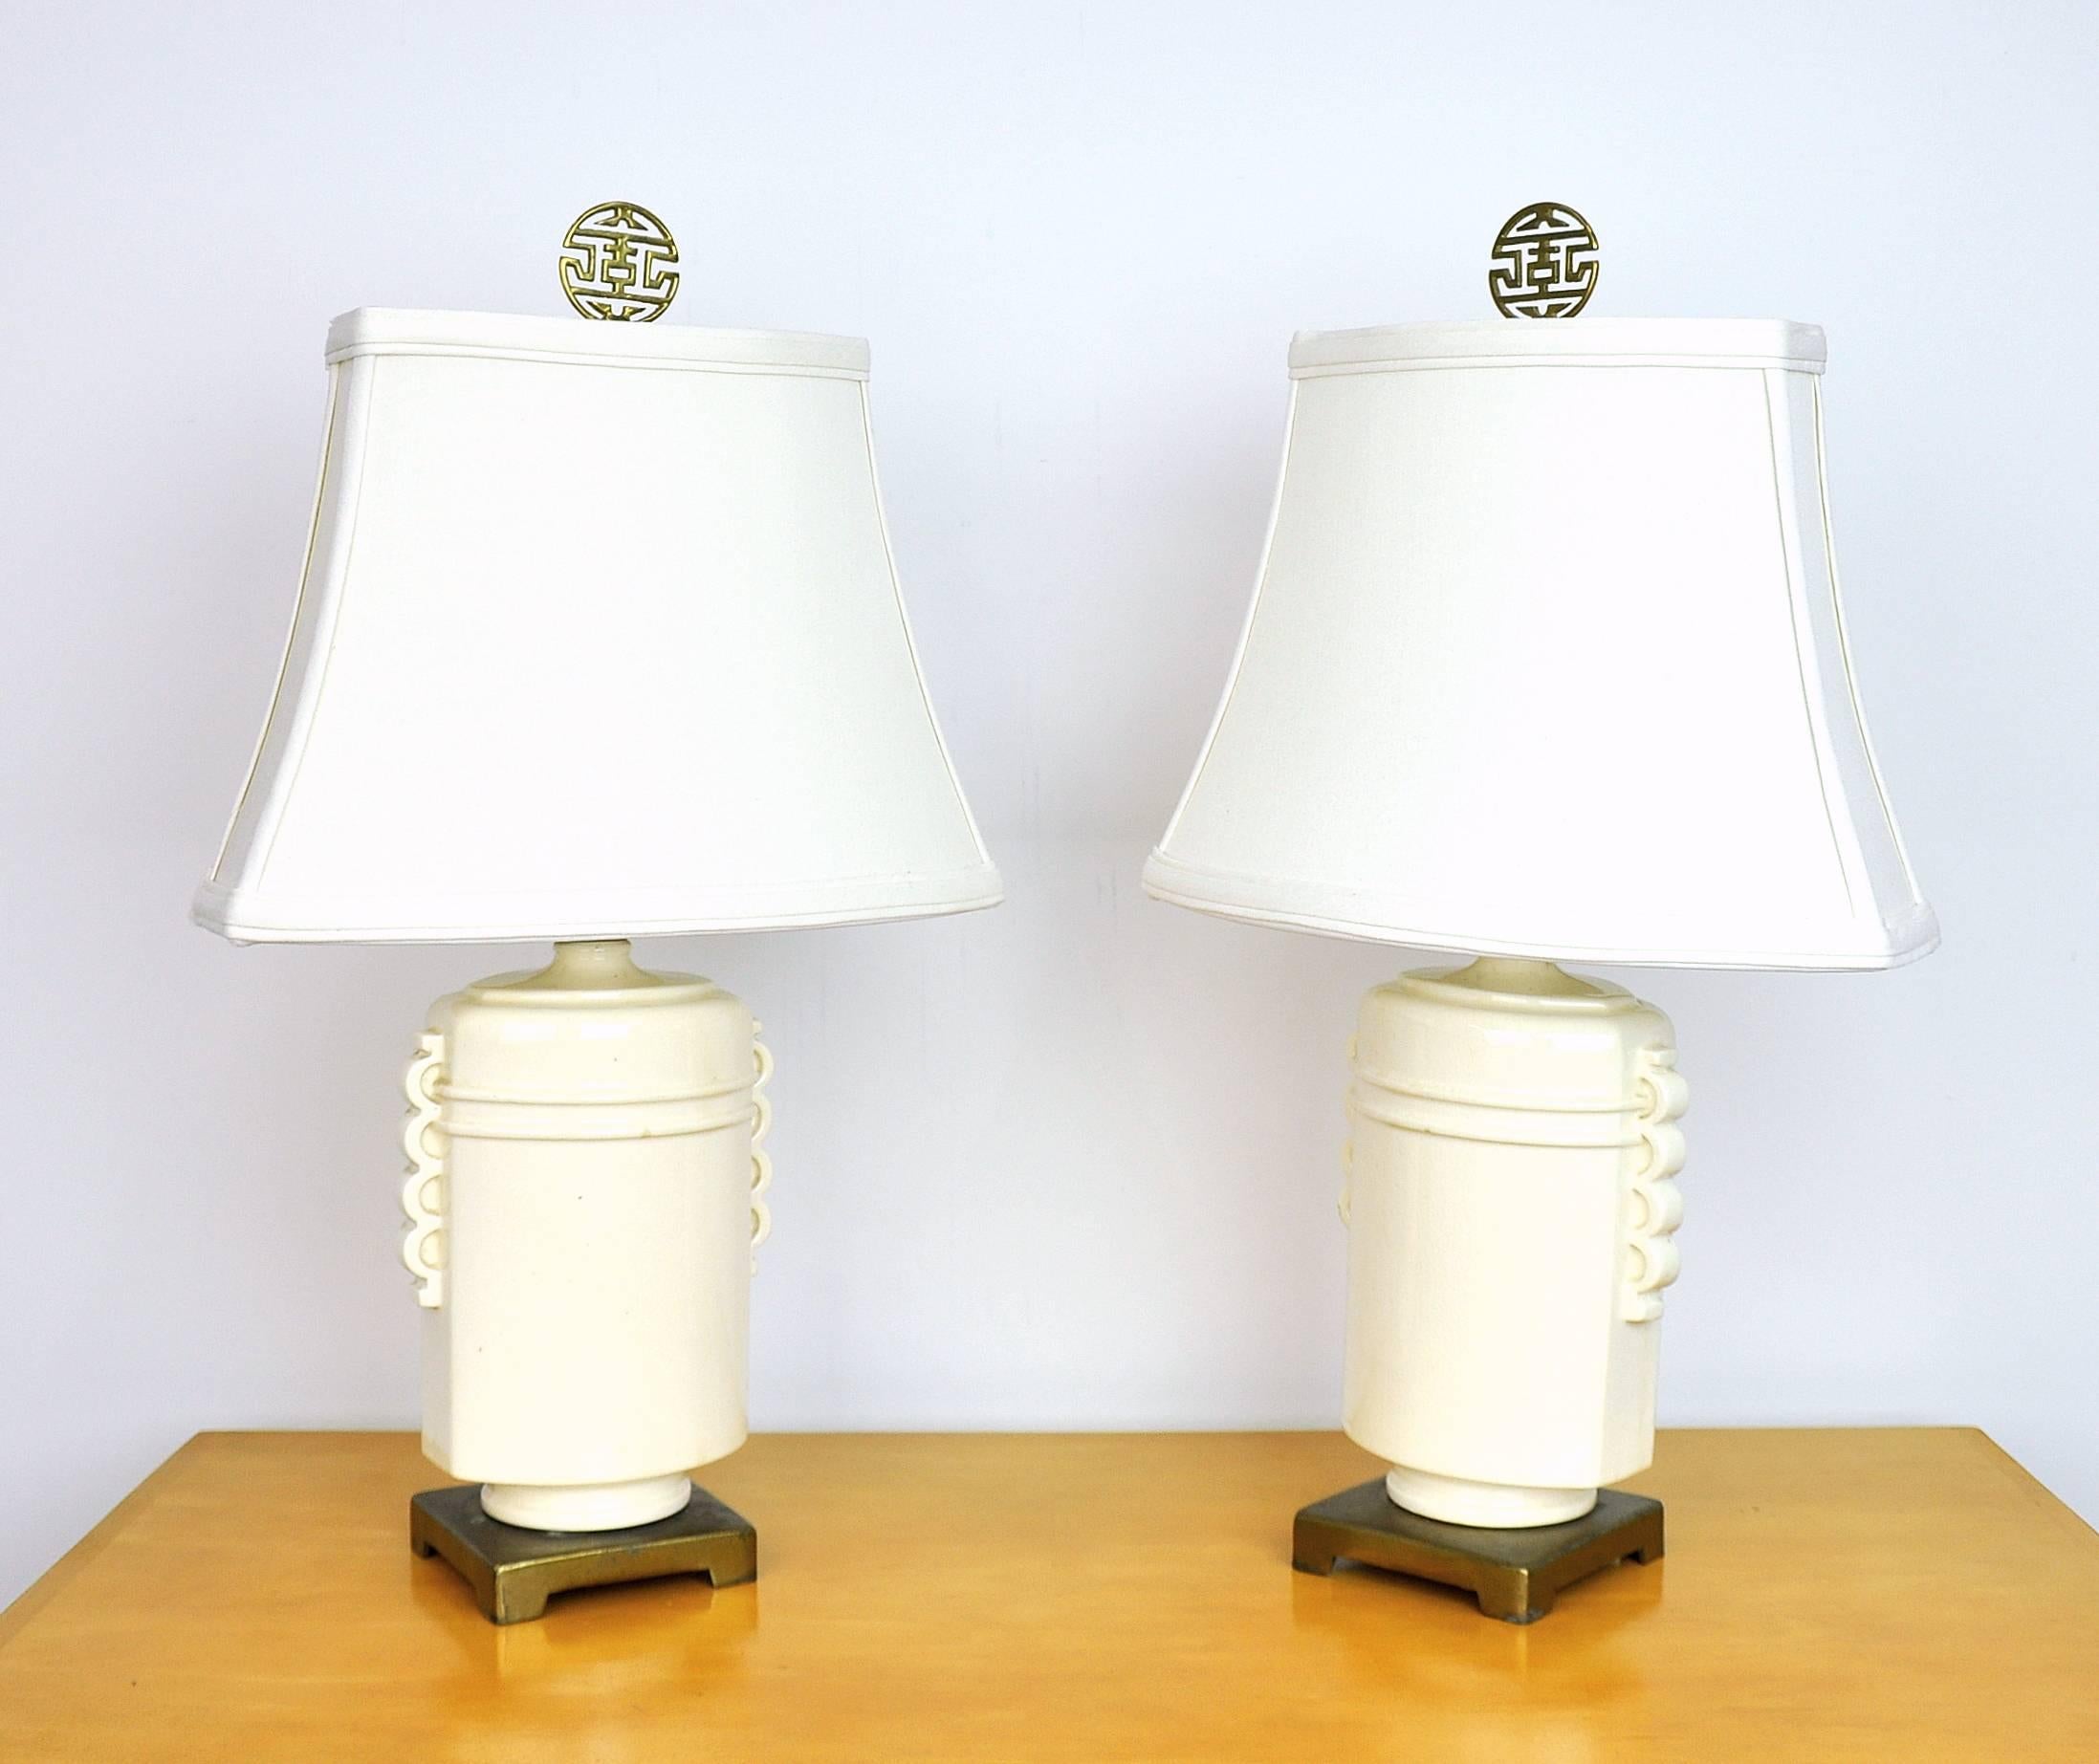 A vintage pair of creamy white porcelain table lamps with brass bases and finials, fitted with brand new shades. Perfect for nightstands or side / end tables. Finials feature chinoiserie motifs.